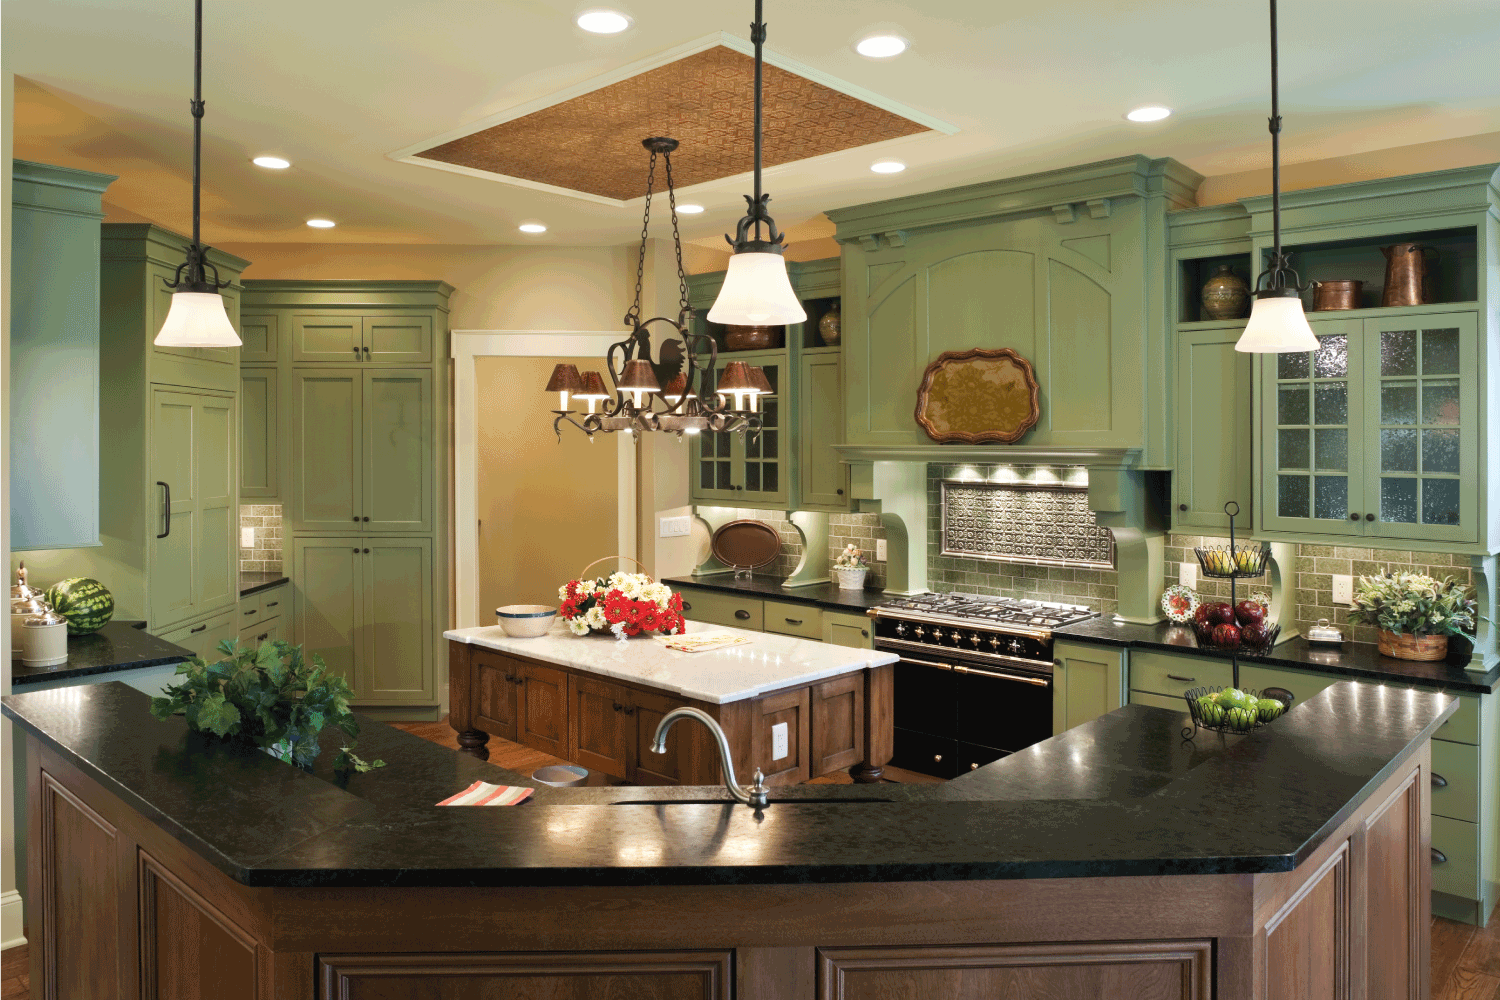 Country style gourmet kitchen in a residential home with painted custom cabinets, marble topped center island, soapstone counter tops and tin ceiling inlay.